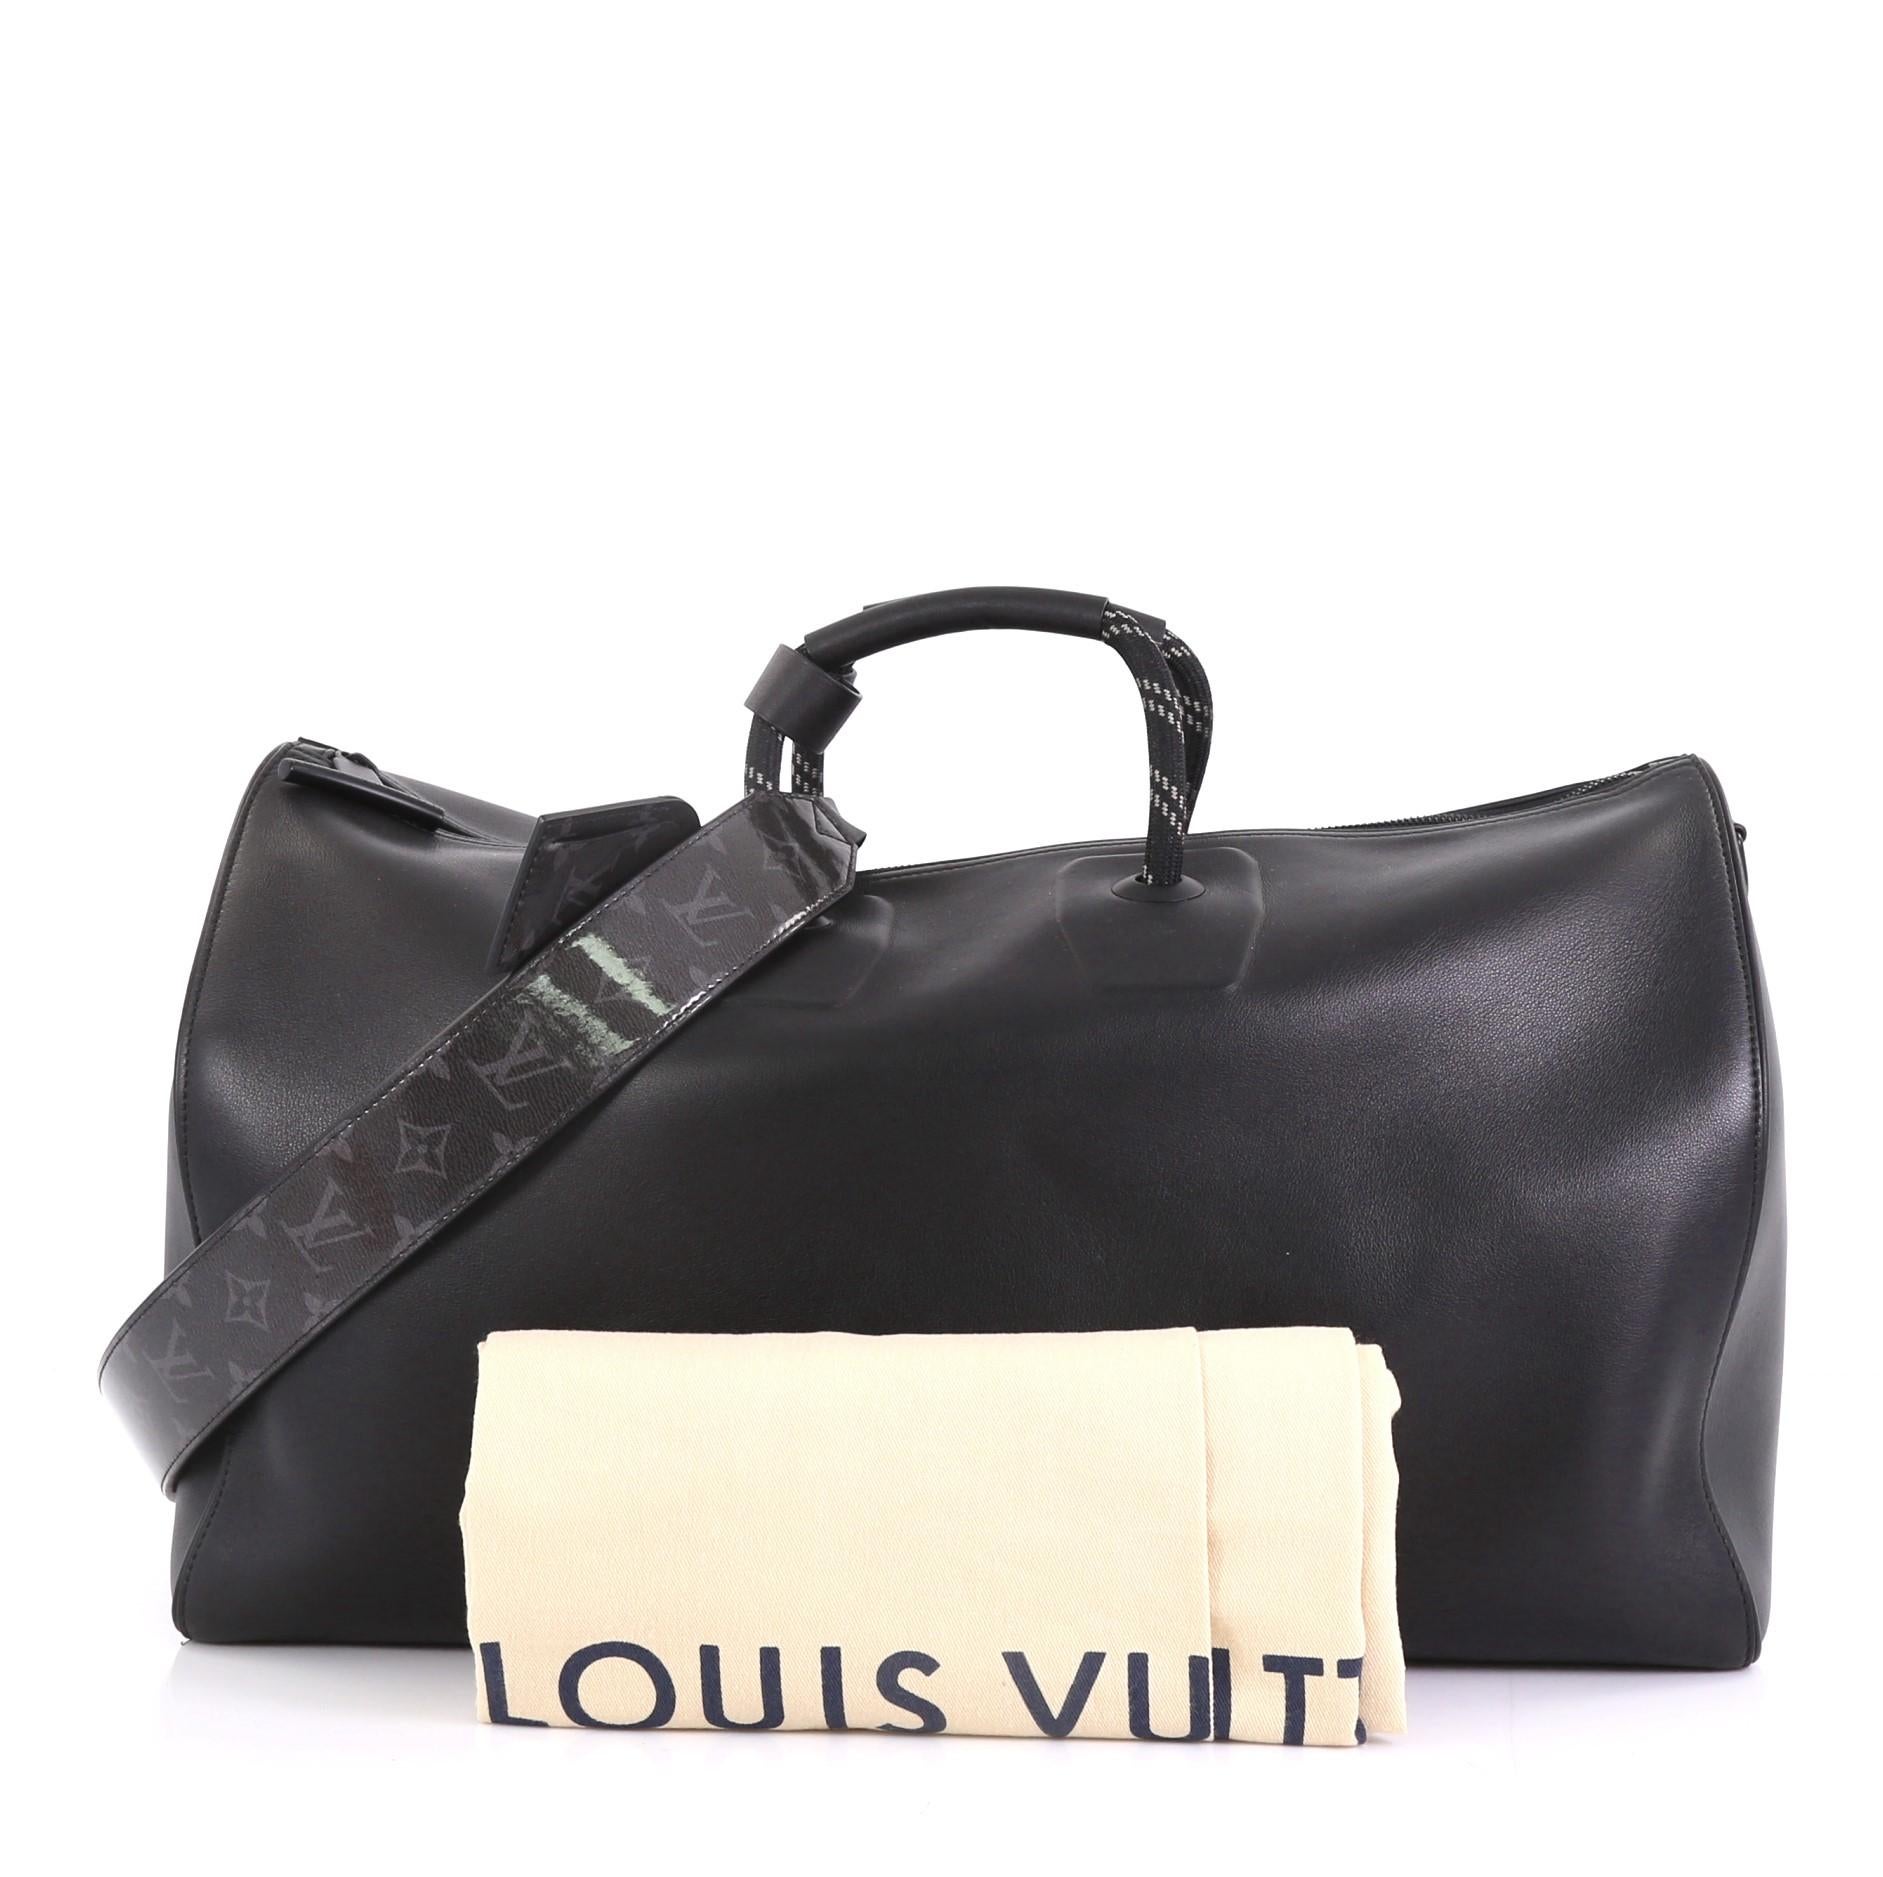 This Louis Vuitton Keepall Bandouliere Bag Infinity Leather with Limited Edition Monogram Glaze Eclipse Canvas 50, crafted in black leather, features dual top handles and black-tone hardware. Its zip closure opens to a black fabric interior with